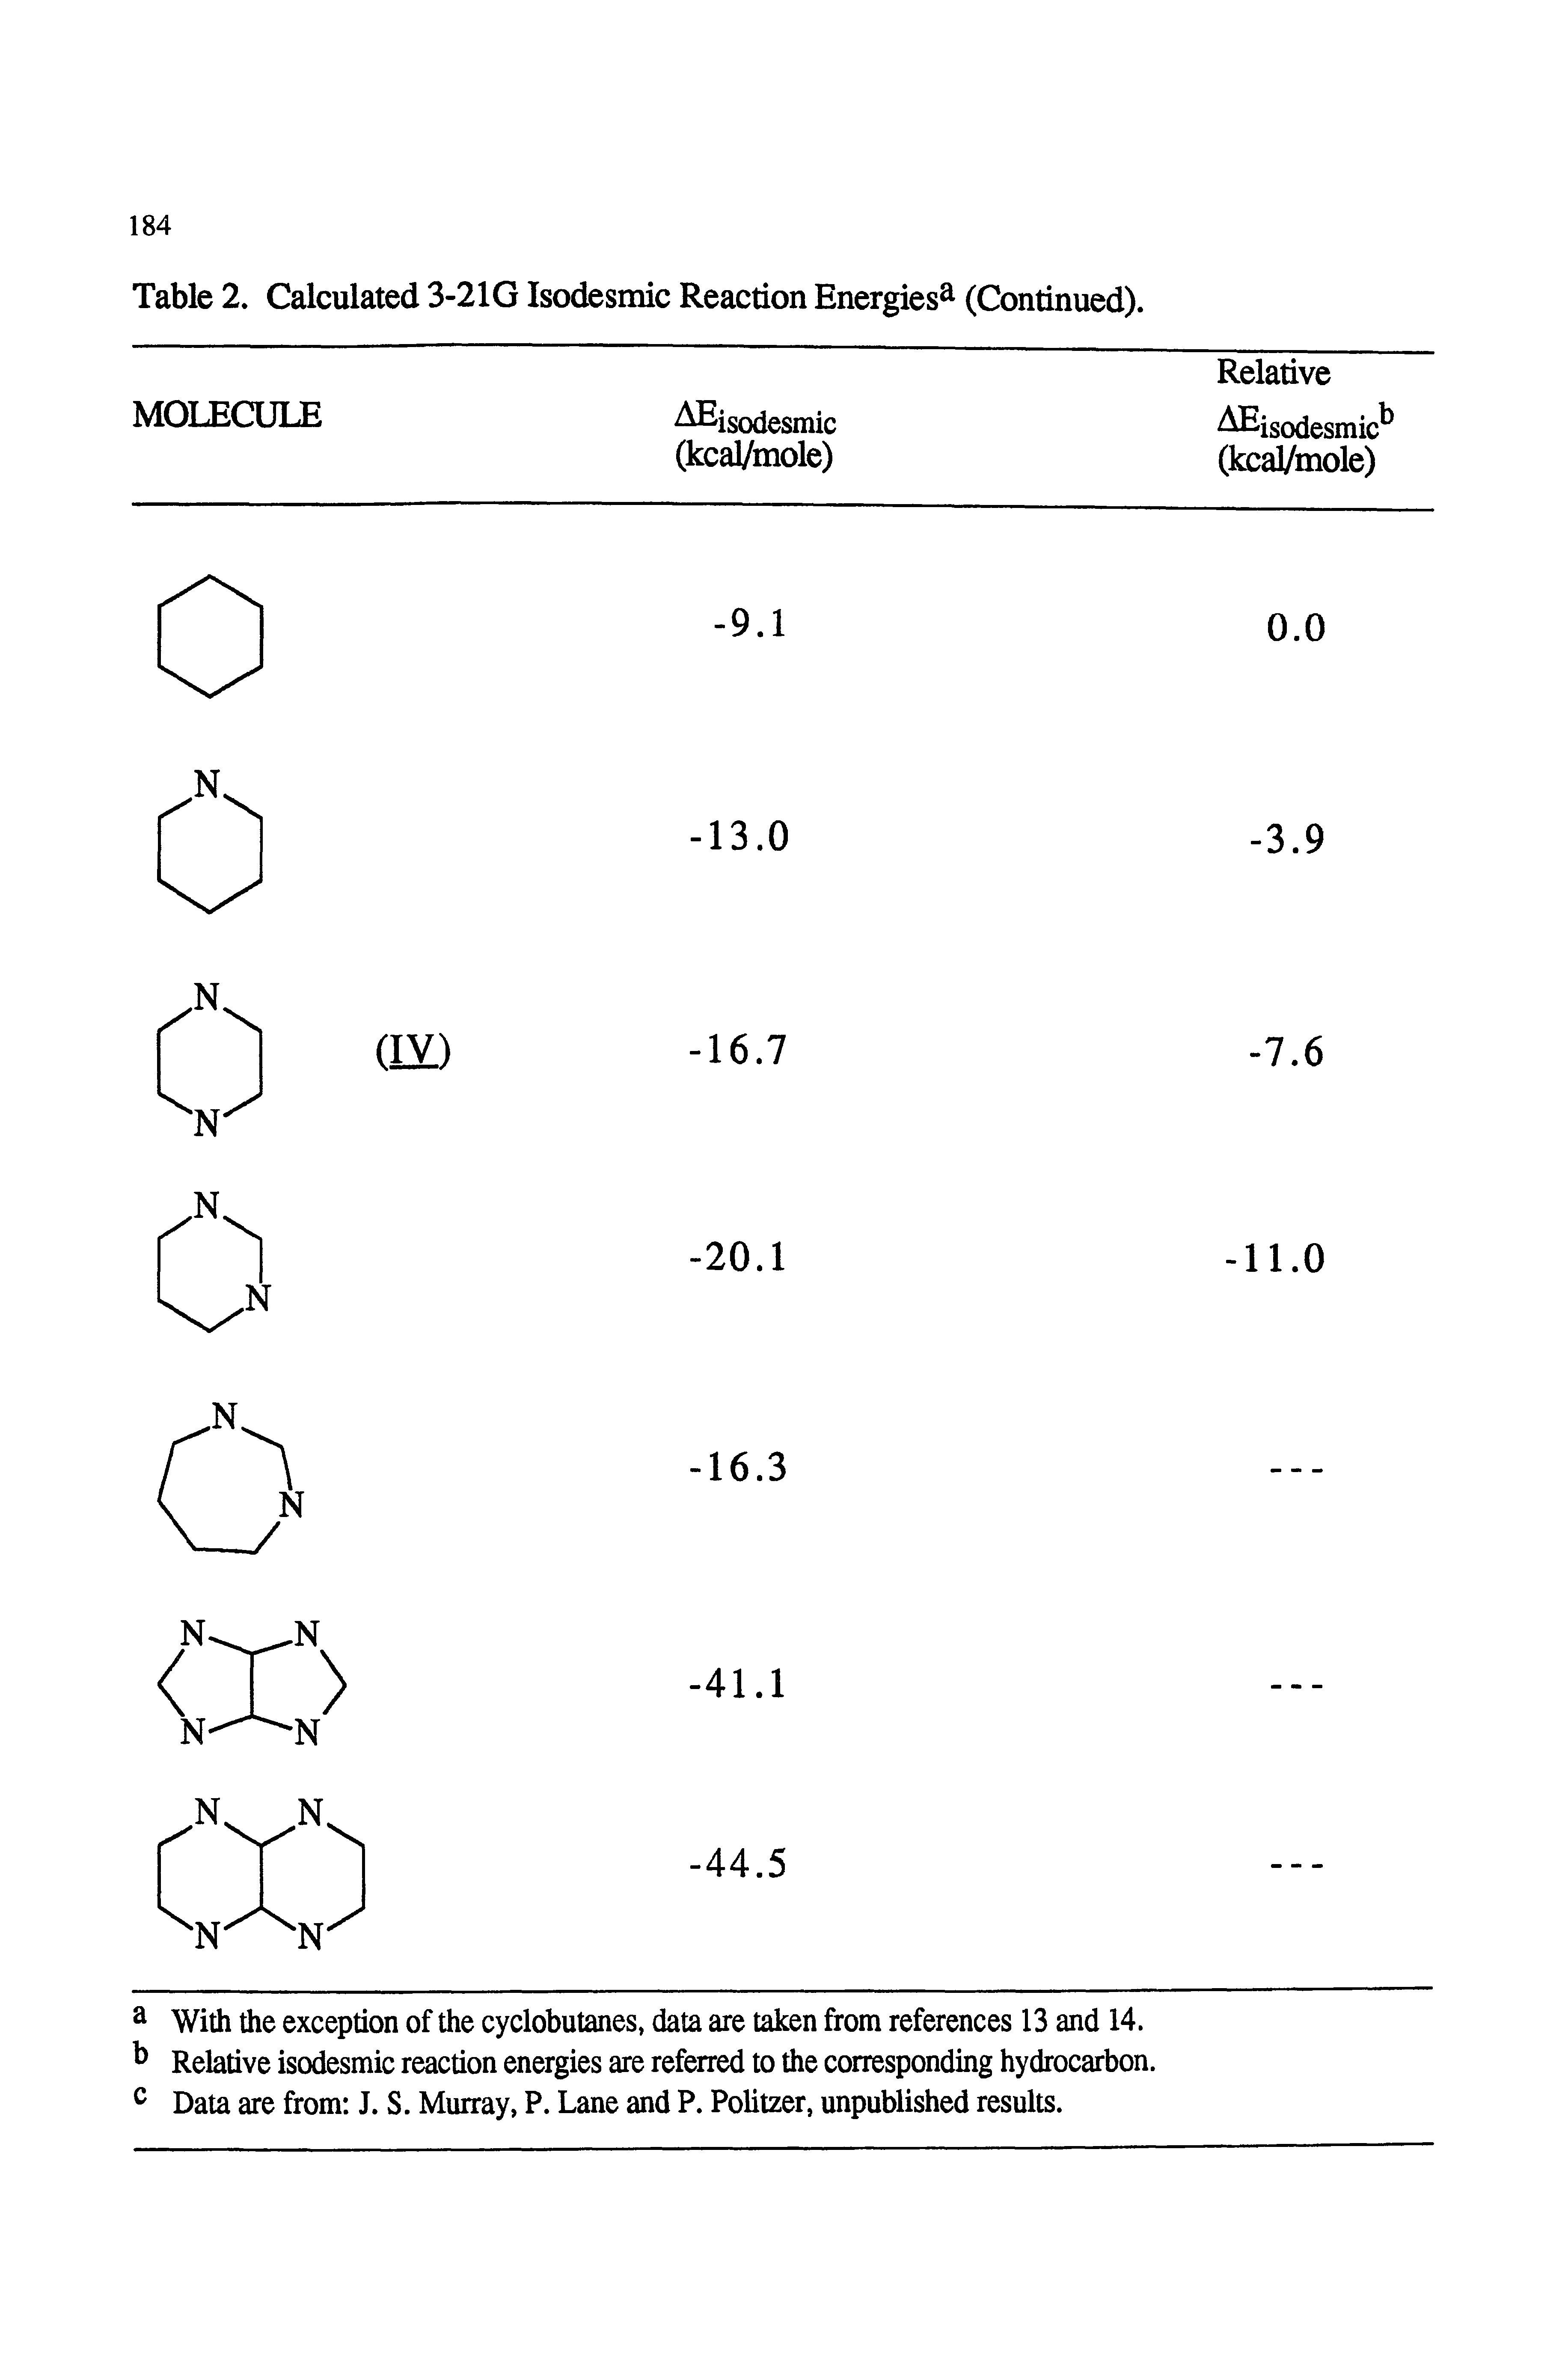 Table 2. Calculated 3-21G Isodesmic Reaction Energies (Continued).